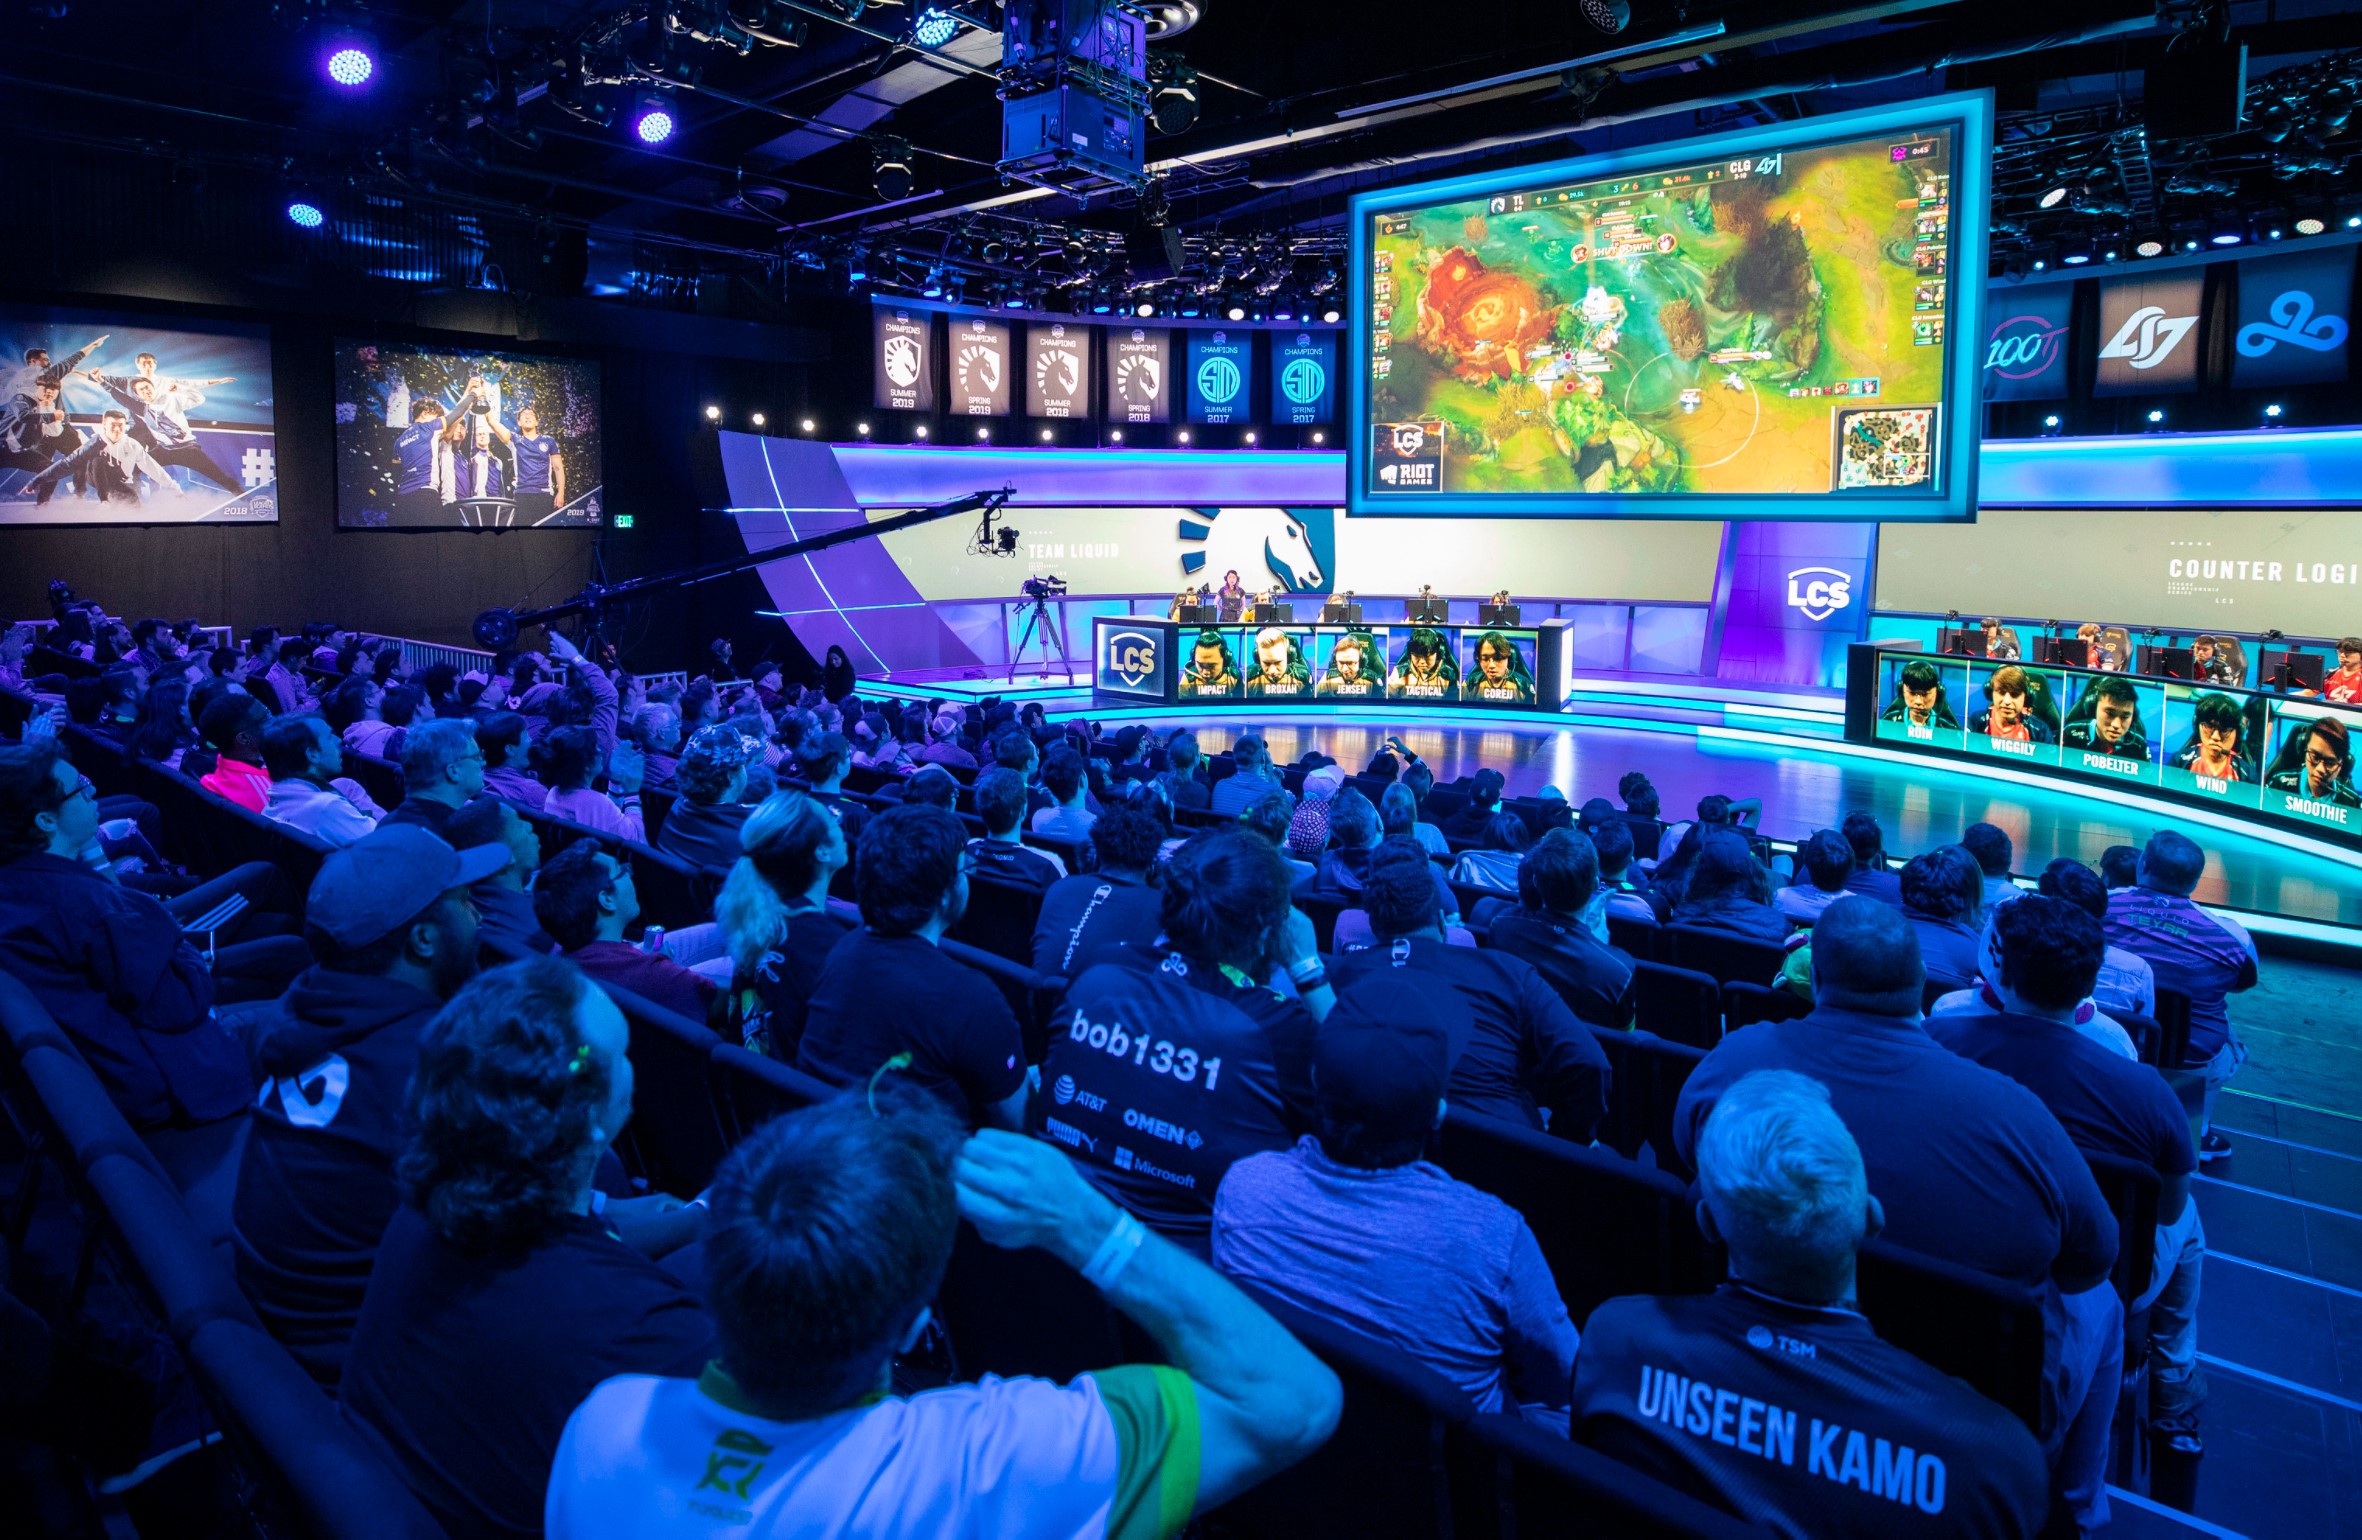 LCS Championship to be held at the LCS Arena, will have no live audience due to COVID-19